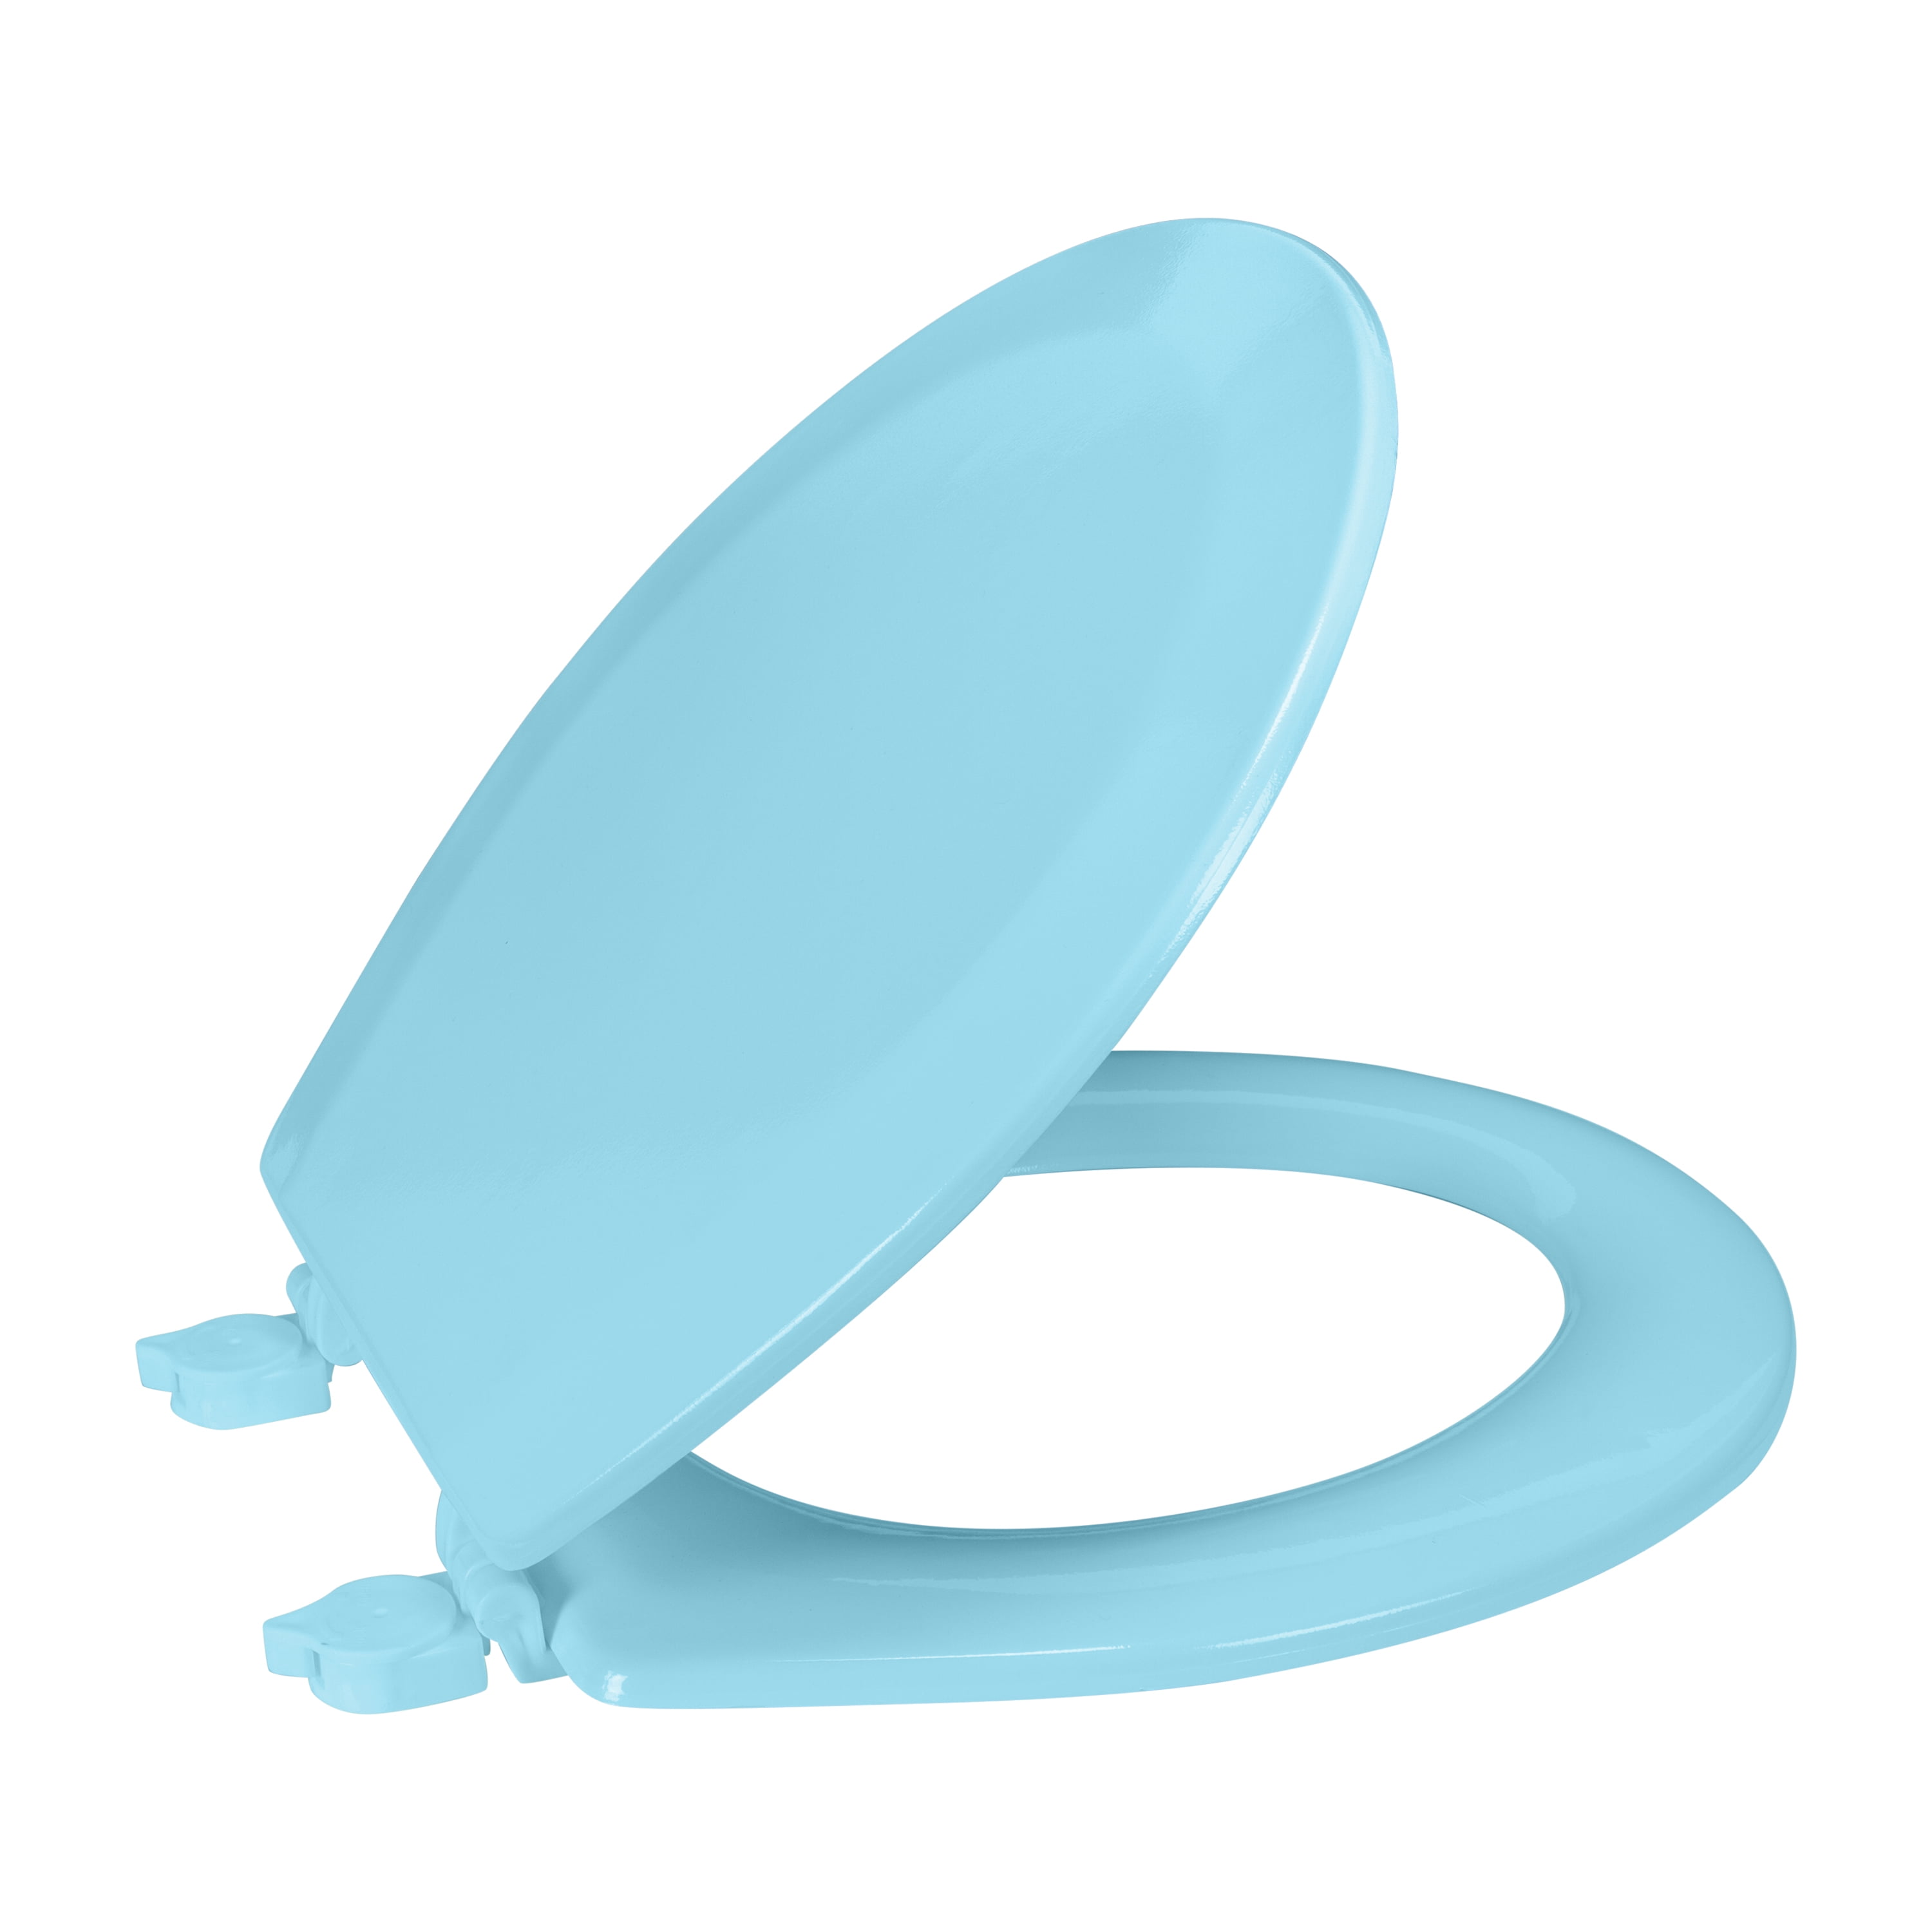 Details about   Sky Blue Glossy Toilet Seat Standard Round Bowl Easy Install Hinges Wood Comfort 